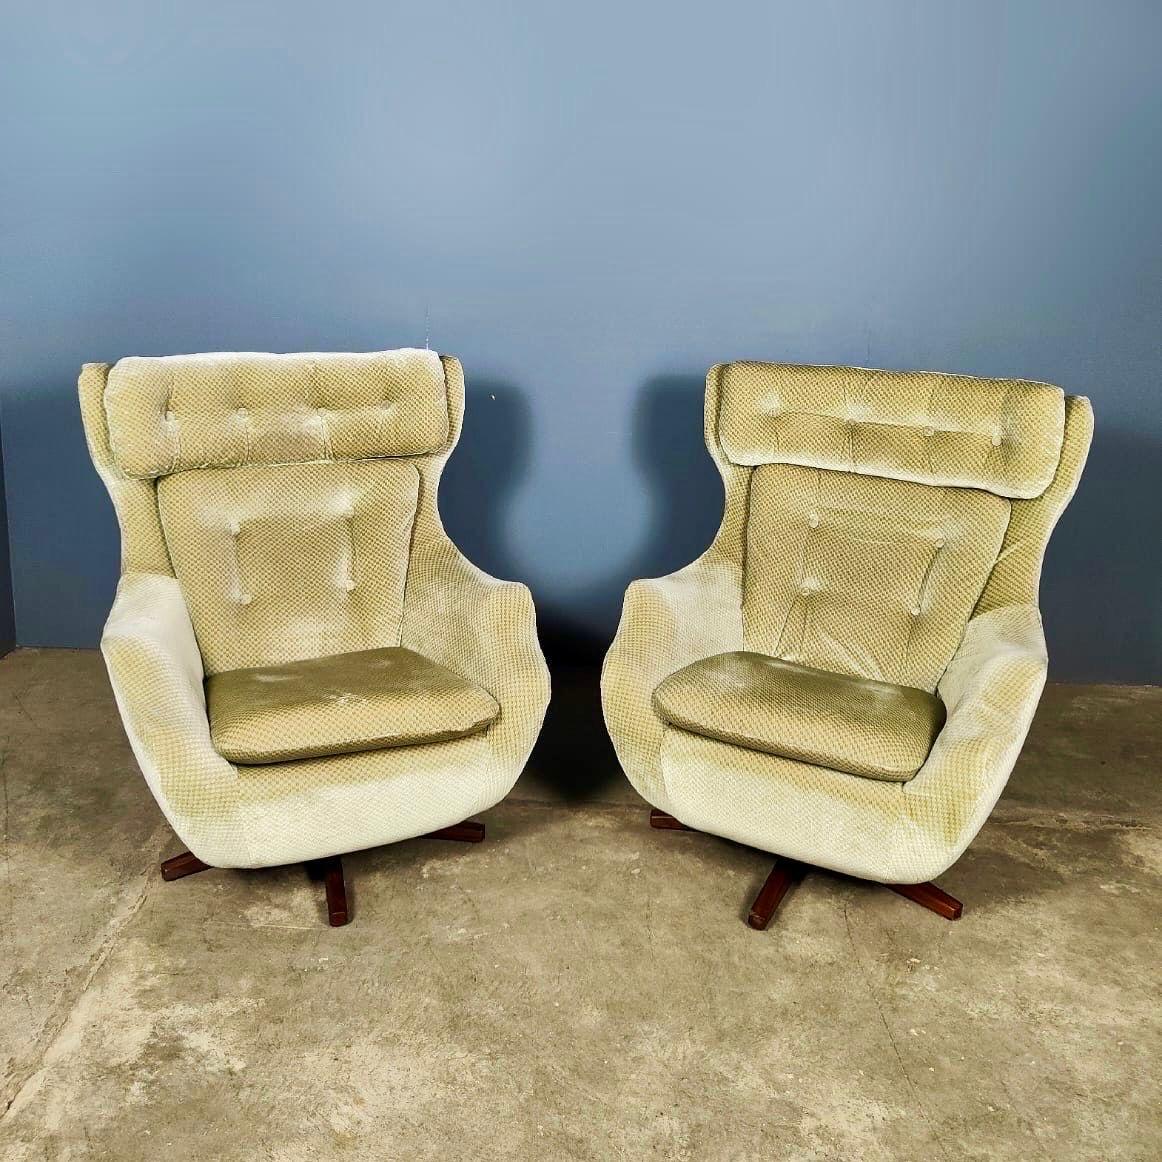 New Stock ✅

Pair Of Parker Knoll Statesman Swivel Egg Lounge Chairs Mid Century Vintage Retro MCM

Launched in 1969 Parker Knoll’s renowned Statesman Chair is truly the king of the egg chairs with its iconic design, seen on film sets. This design